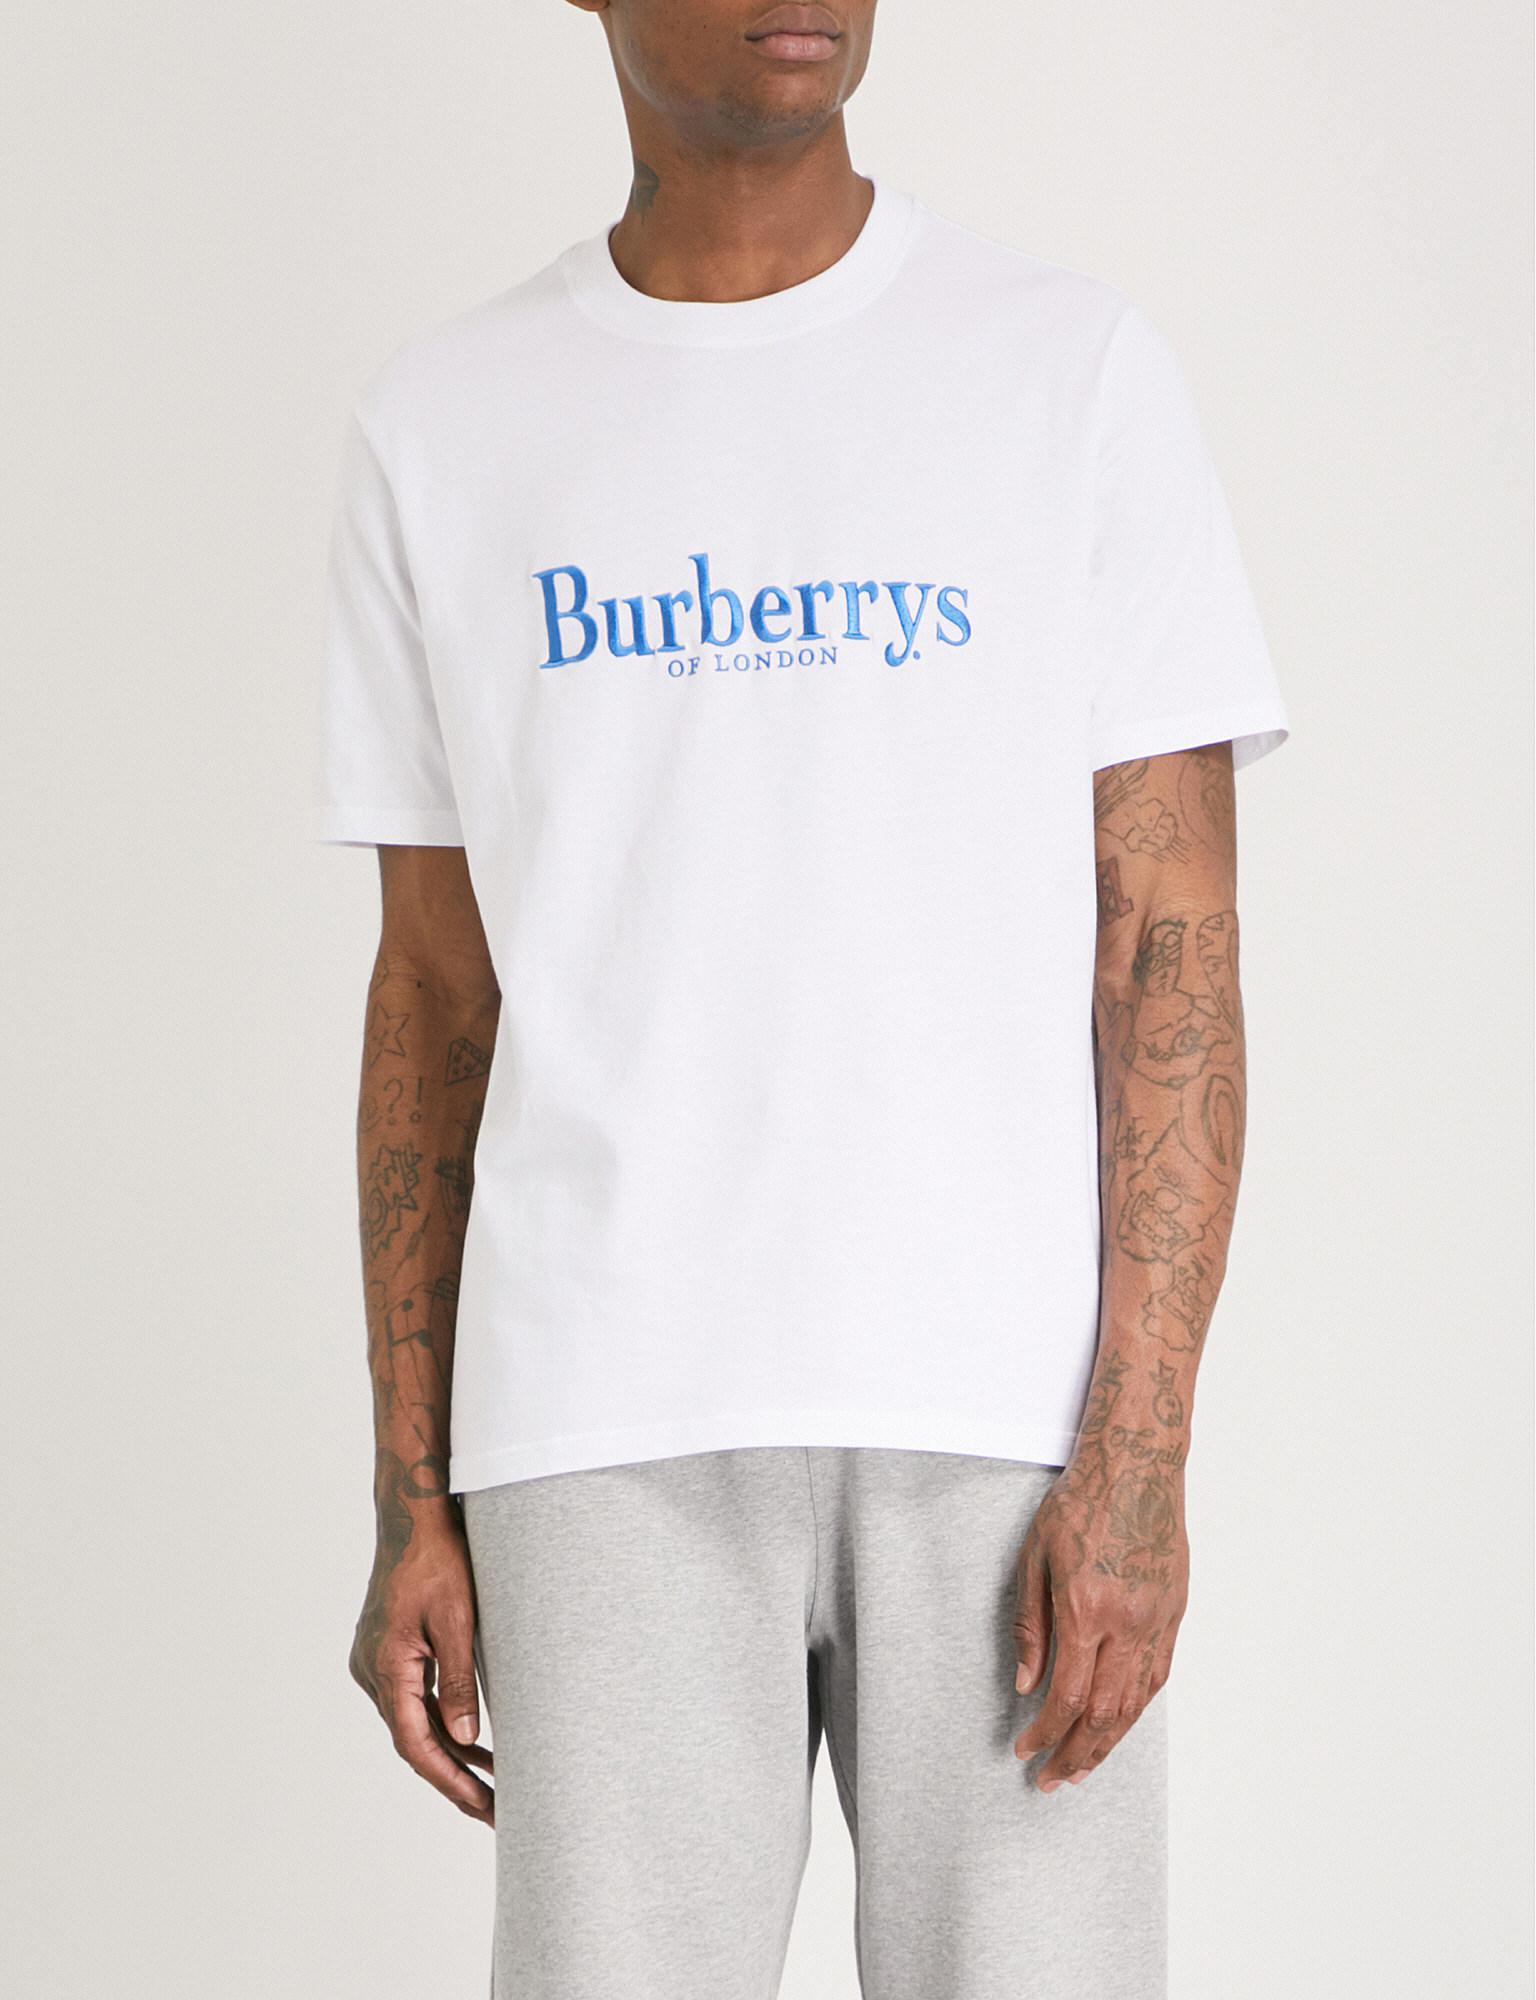 Burberry S Embroidered Cotton-jersey T-shirt in White for Men -